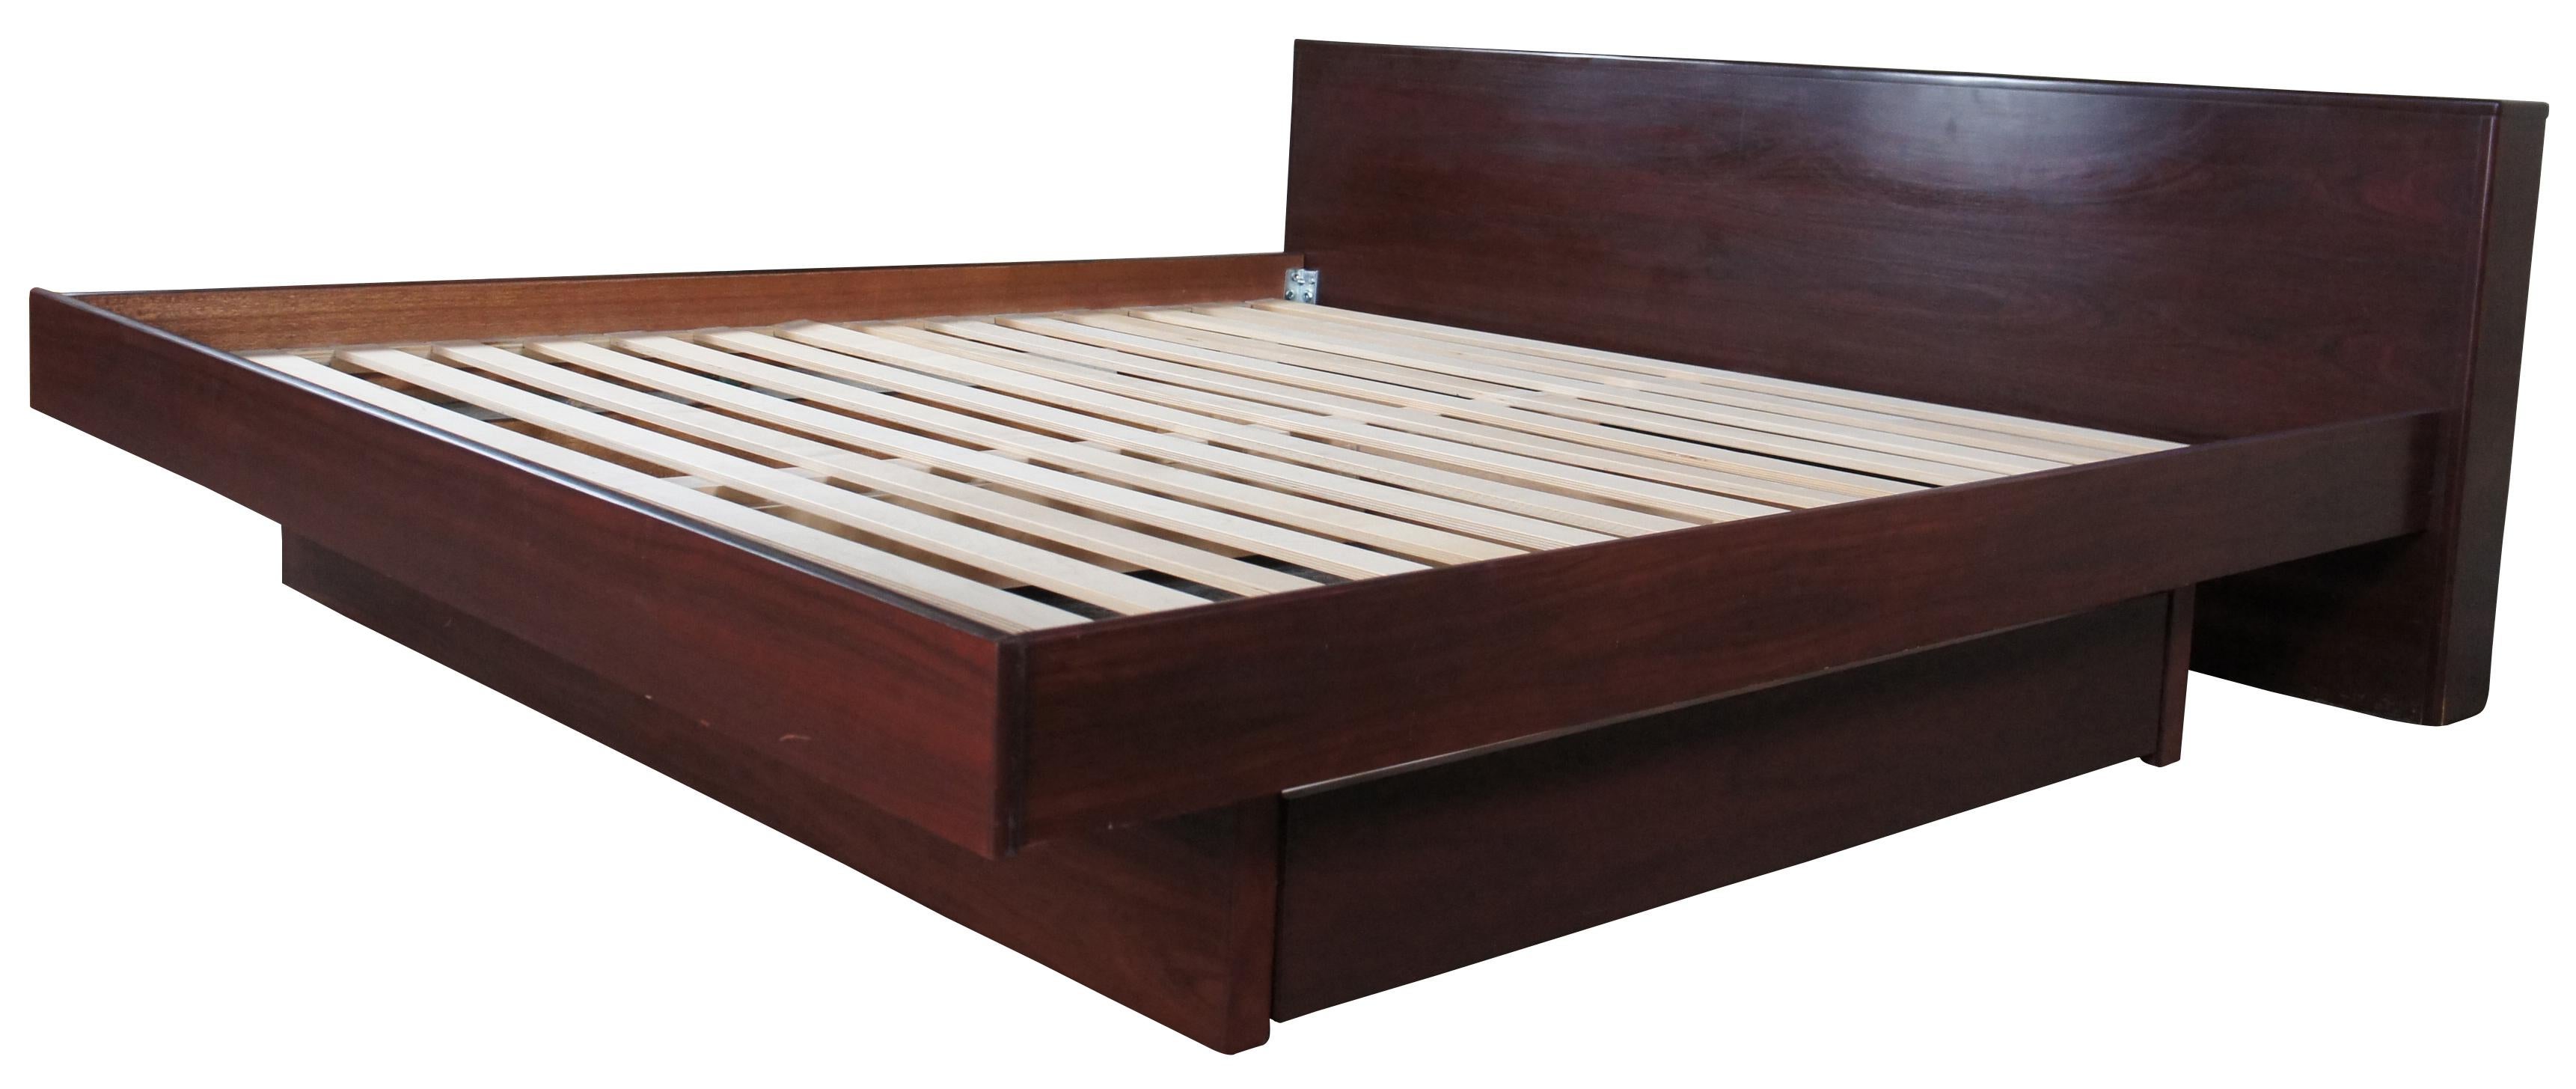 Vintage Mobican Danish Modern King size floating bed with under storage. Made from Rosewood with with a sleac design featuring pull out drawers for garmants along the left and rid side. 

Mobican is a Canadian luxury furniture manufacturer. They